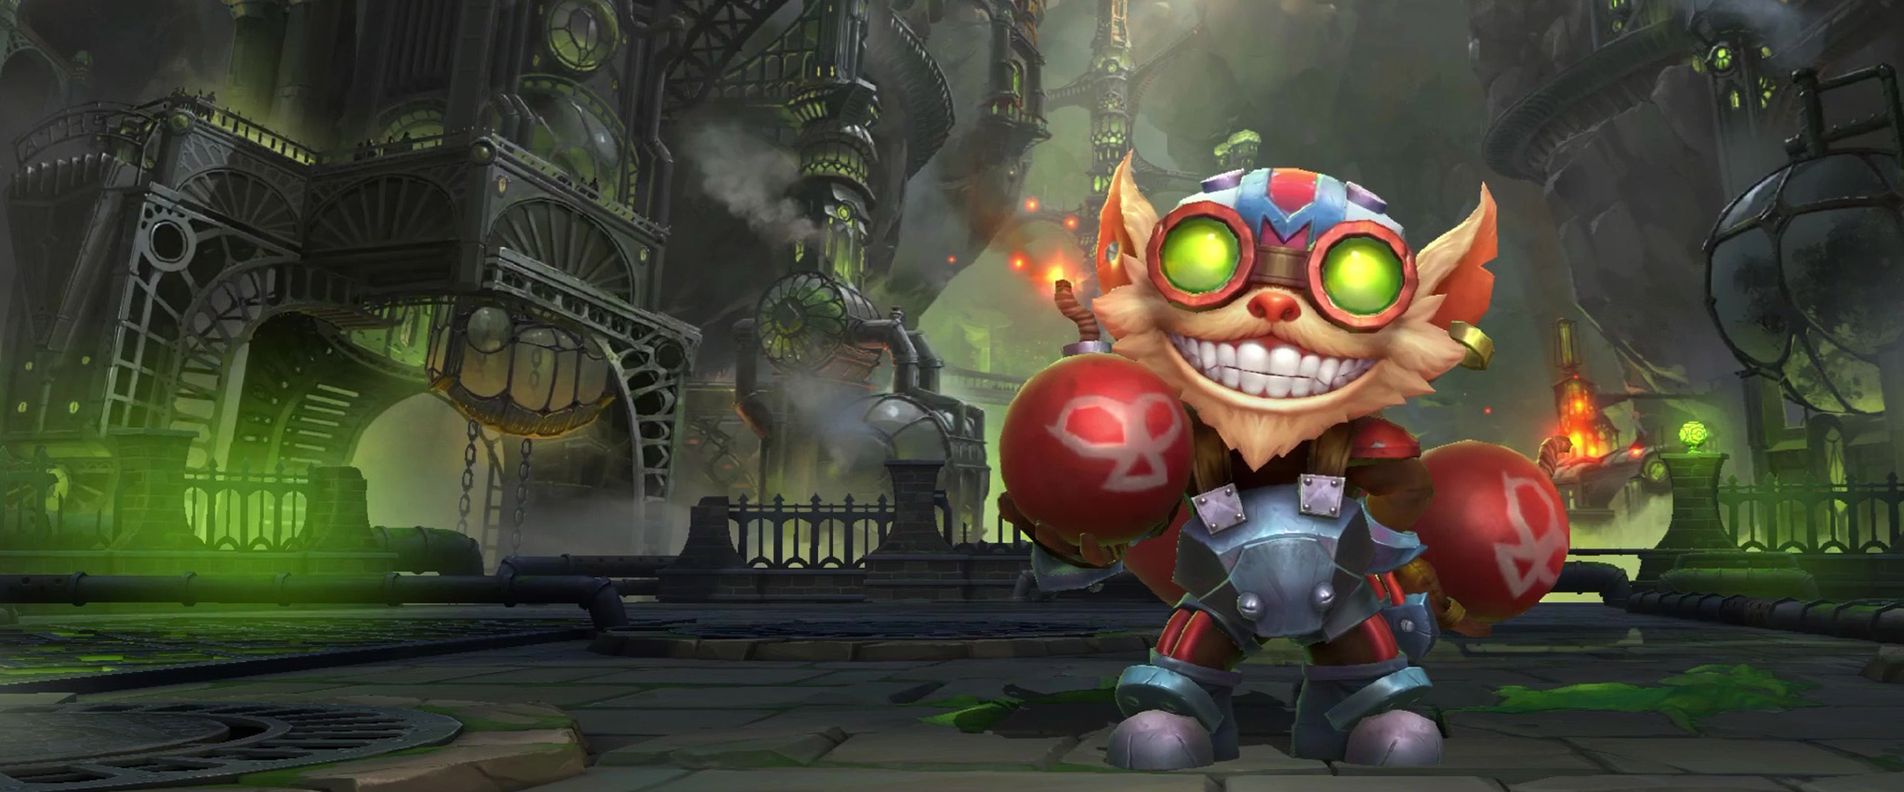 Ziggs Standing Around with Bombs in His Hands Looking Evil and Smiling